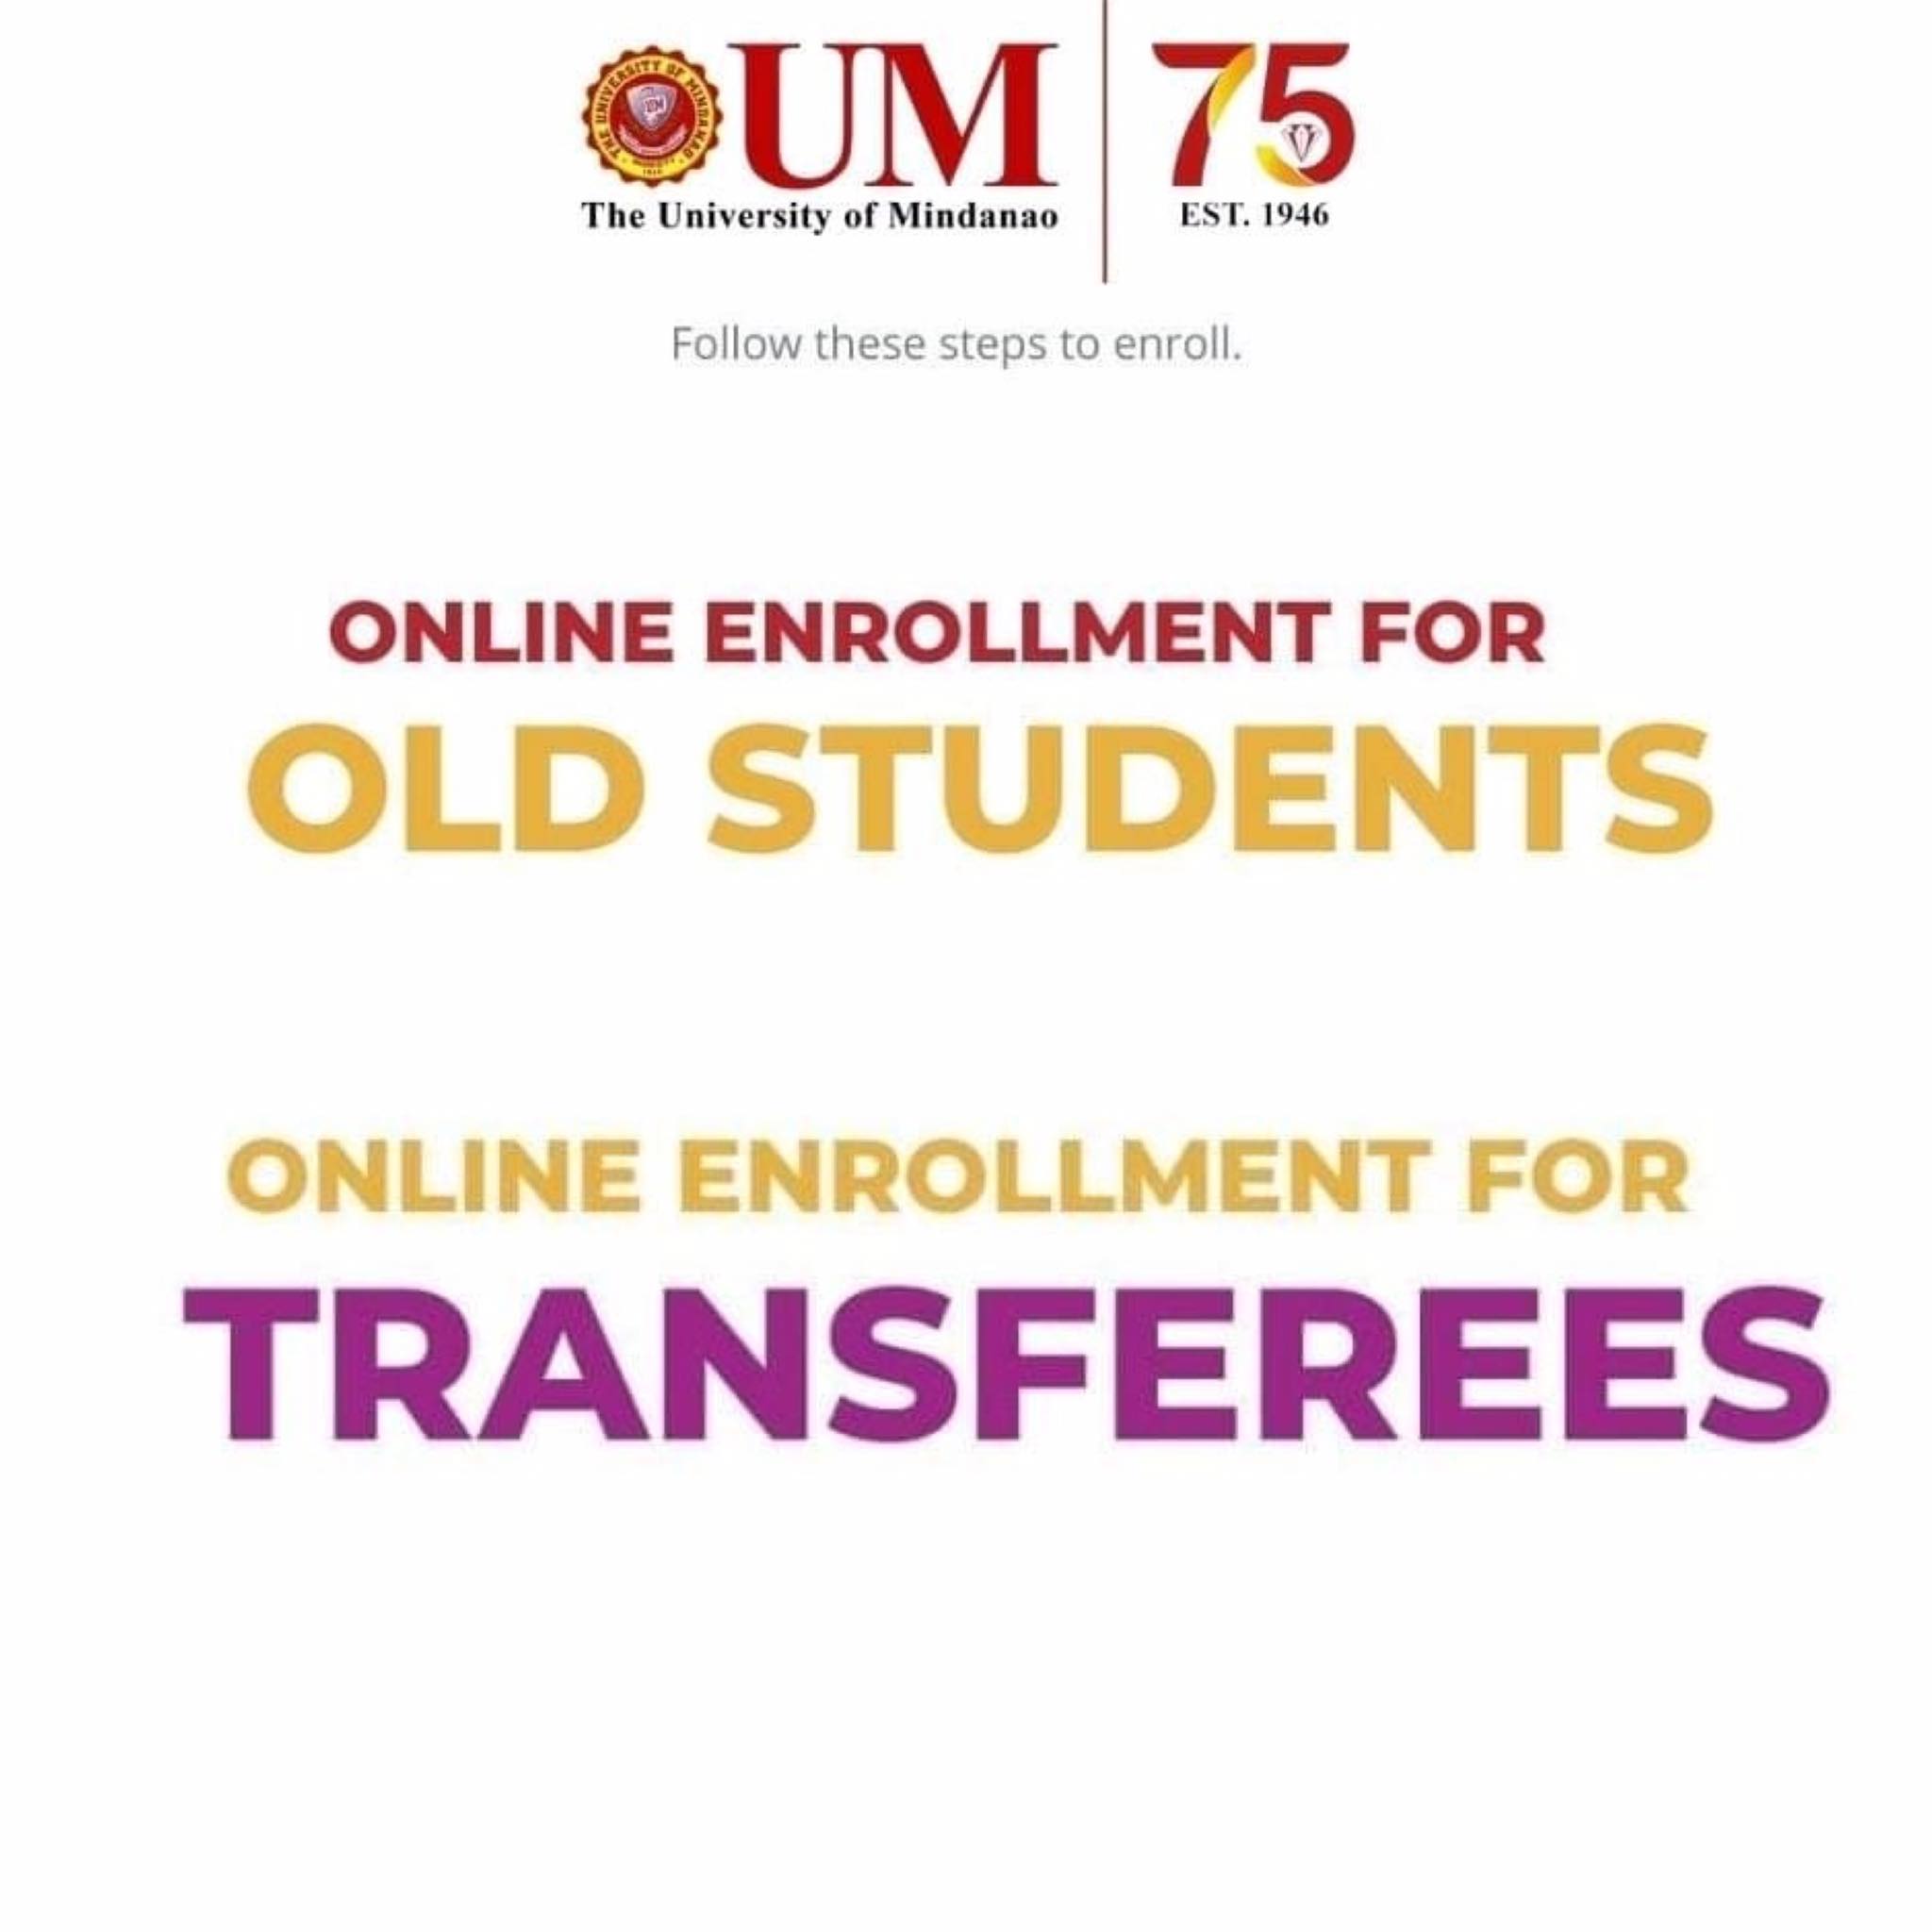 Online Enrollment Guide for OLD STUDENTS and TRANSFEREES for First Semester, SY 2021 - 2022